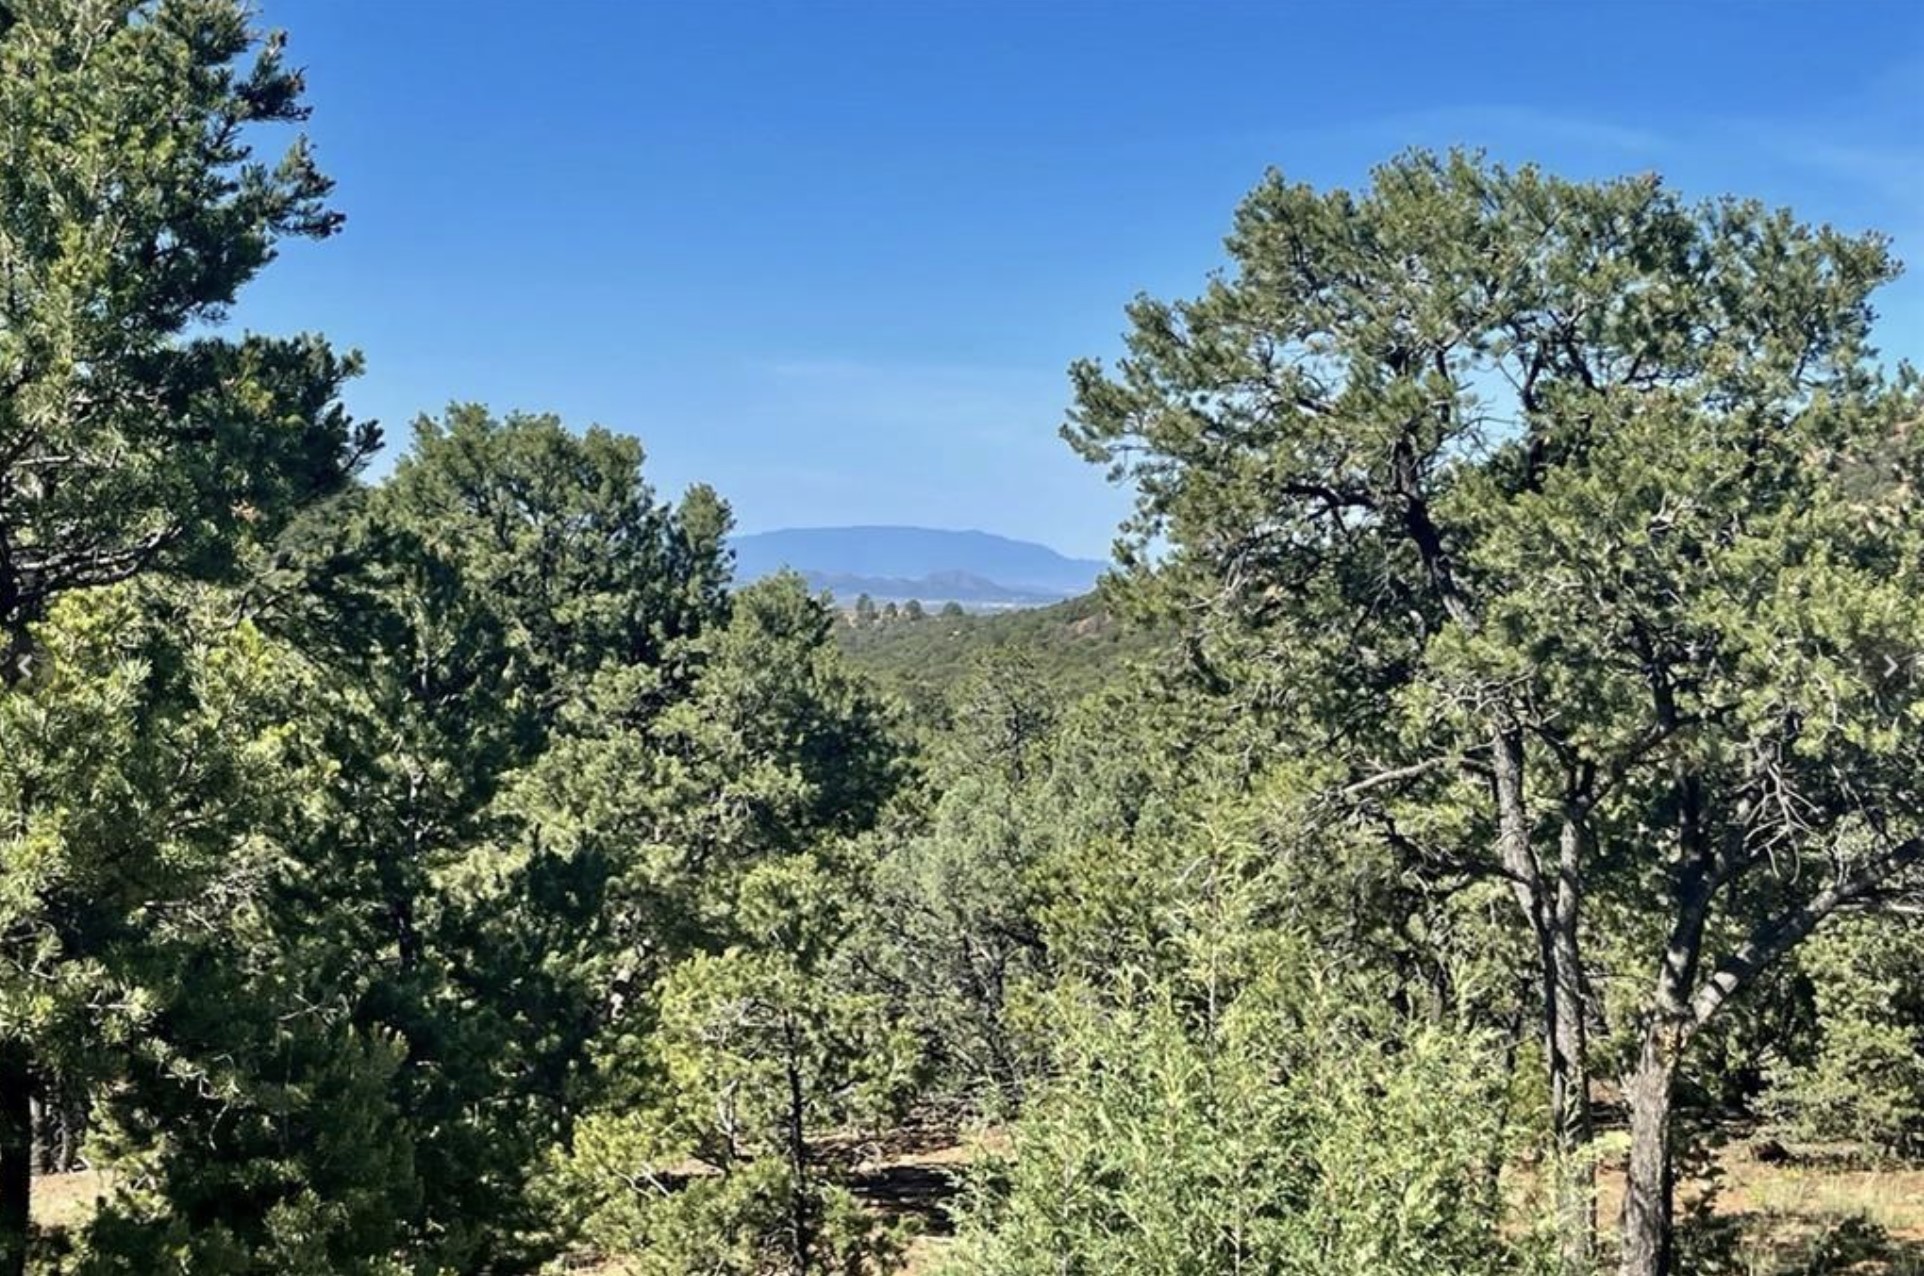 1820 Kachina Heights Lot 8, Santa Fe, New Mexico 87501, 3 Bedrooms Bedrooms, ,4 BathroomsBathrooms,Residential,For Sale,1820 Kachina Heights Lot 8,202340853